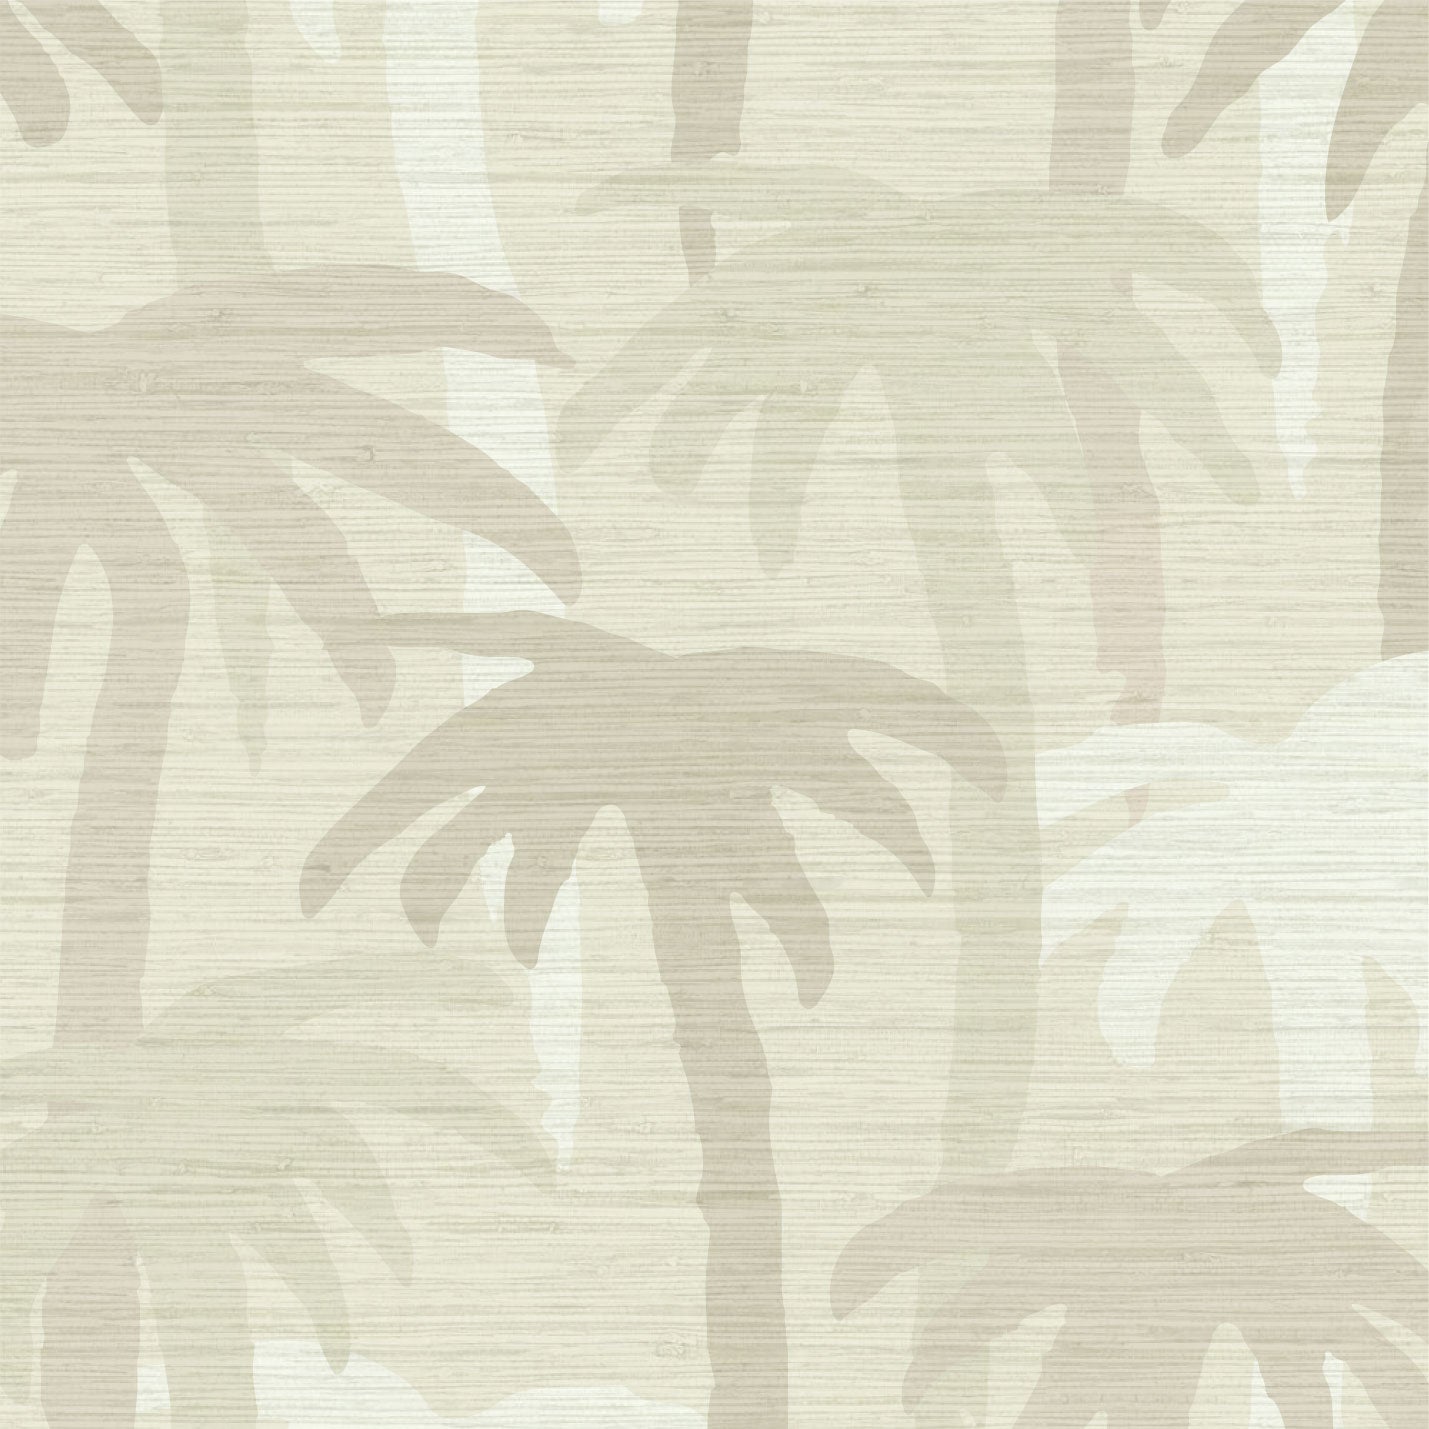 Grasscloth wallpaper Natural Textured Eco-Friendly Non-toxic High-quality  Sustainable Interior Design Bold Custom Tailor-made Retro chic Bold Tropical Jungle Coastal Garden Seaside Coastal Seashore Waterfront Vacation home styling Retreat Relaxed beach vibes Beach cottage Shoreline Oceanfront palm tree '90s surf graphic neutral tonal white cream off-white sand tan beige